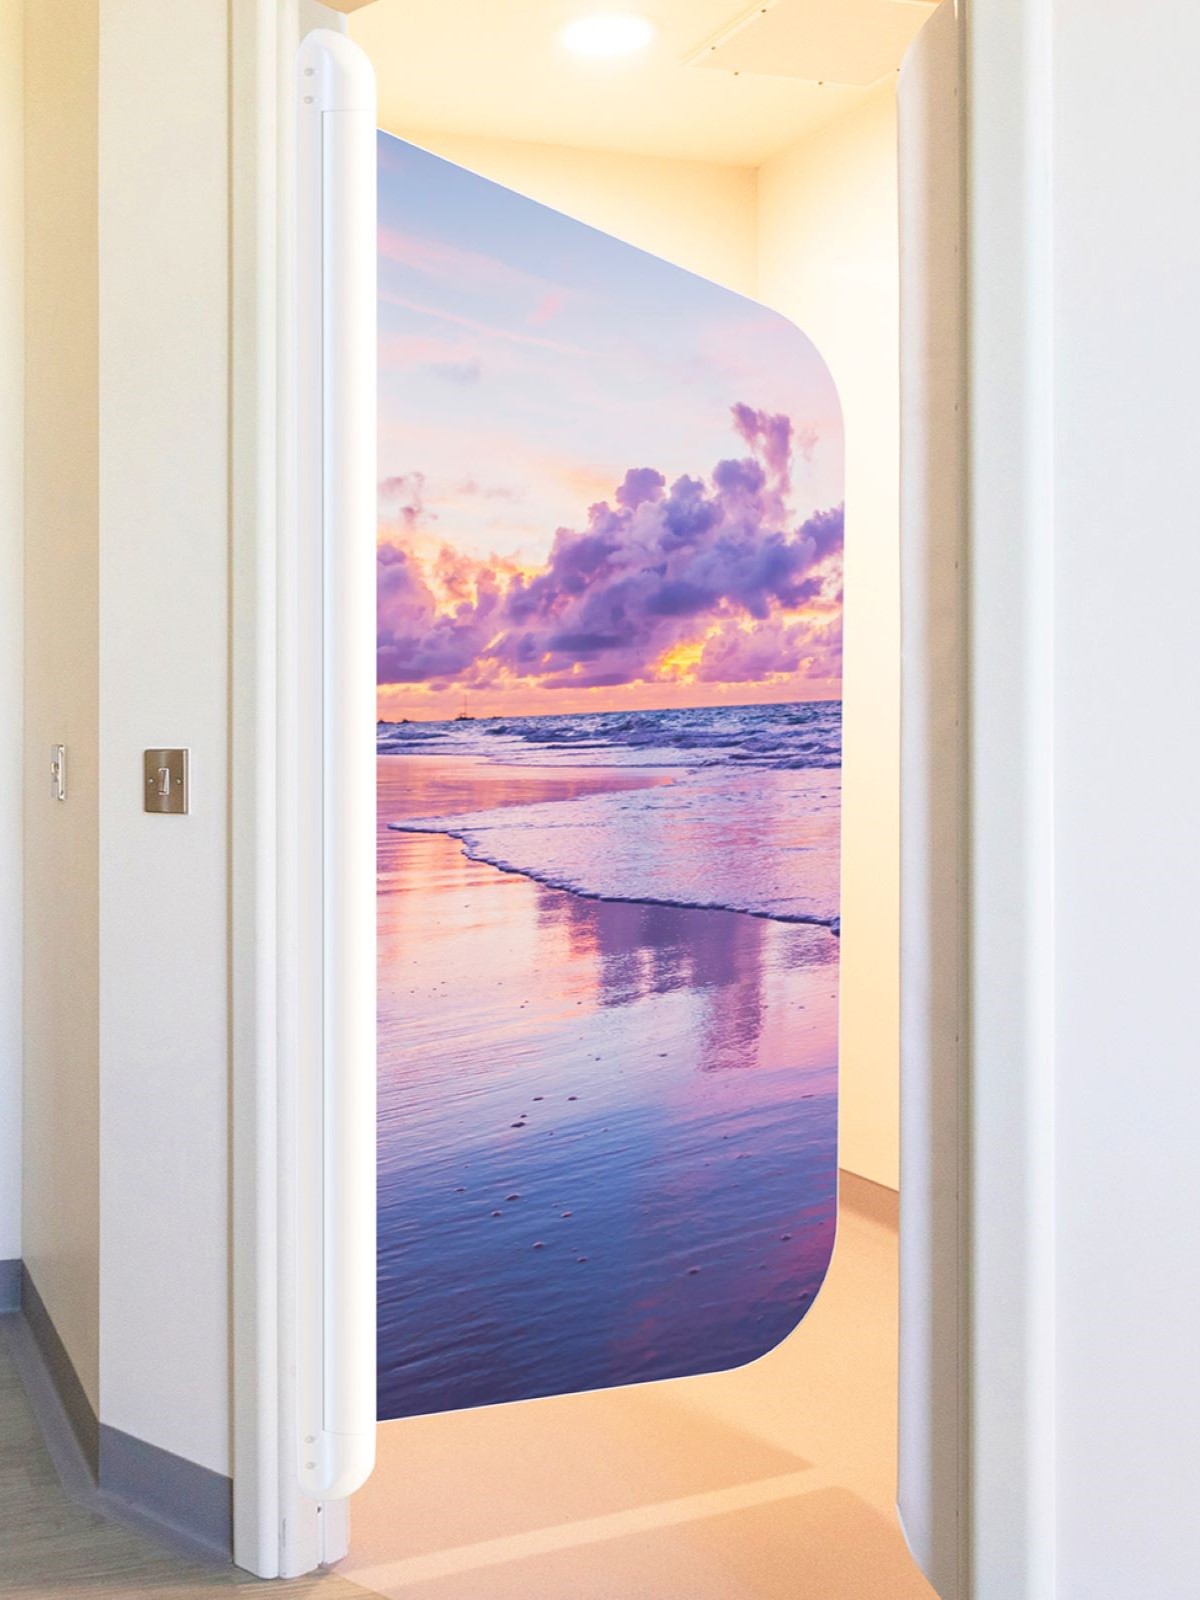 An anti-ligature doorset with for patient bathroom areas to maintain privacy and safety, manufactured by Kingsway Group USA for behavioral health facilities.